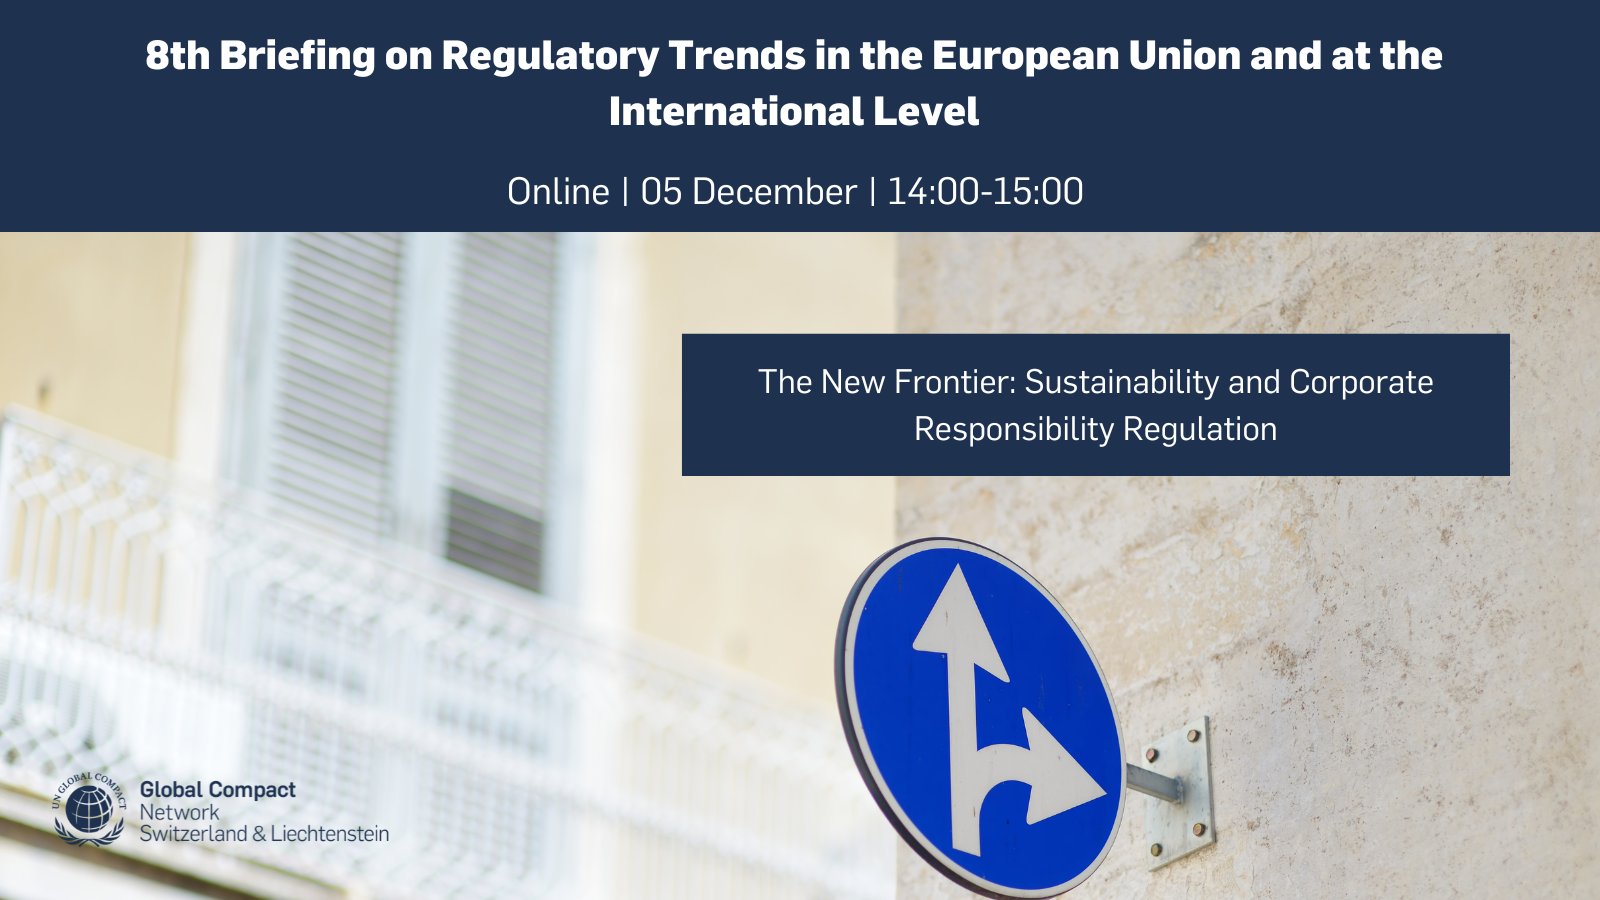 The New Frontier: Sustainability and Corporate Responsibility Regulation